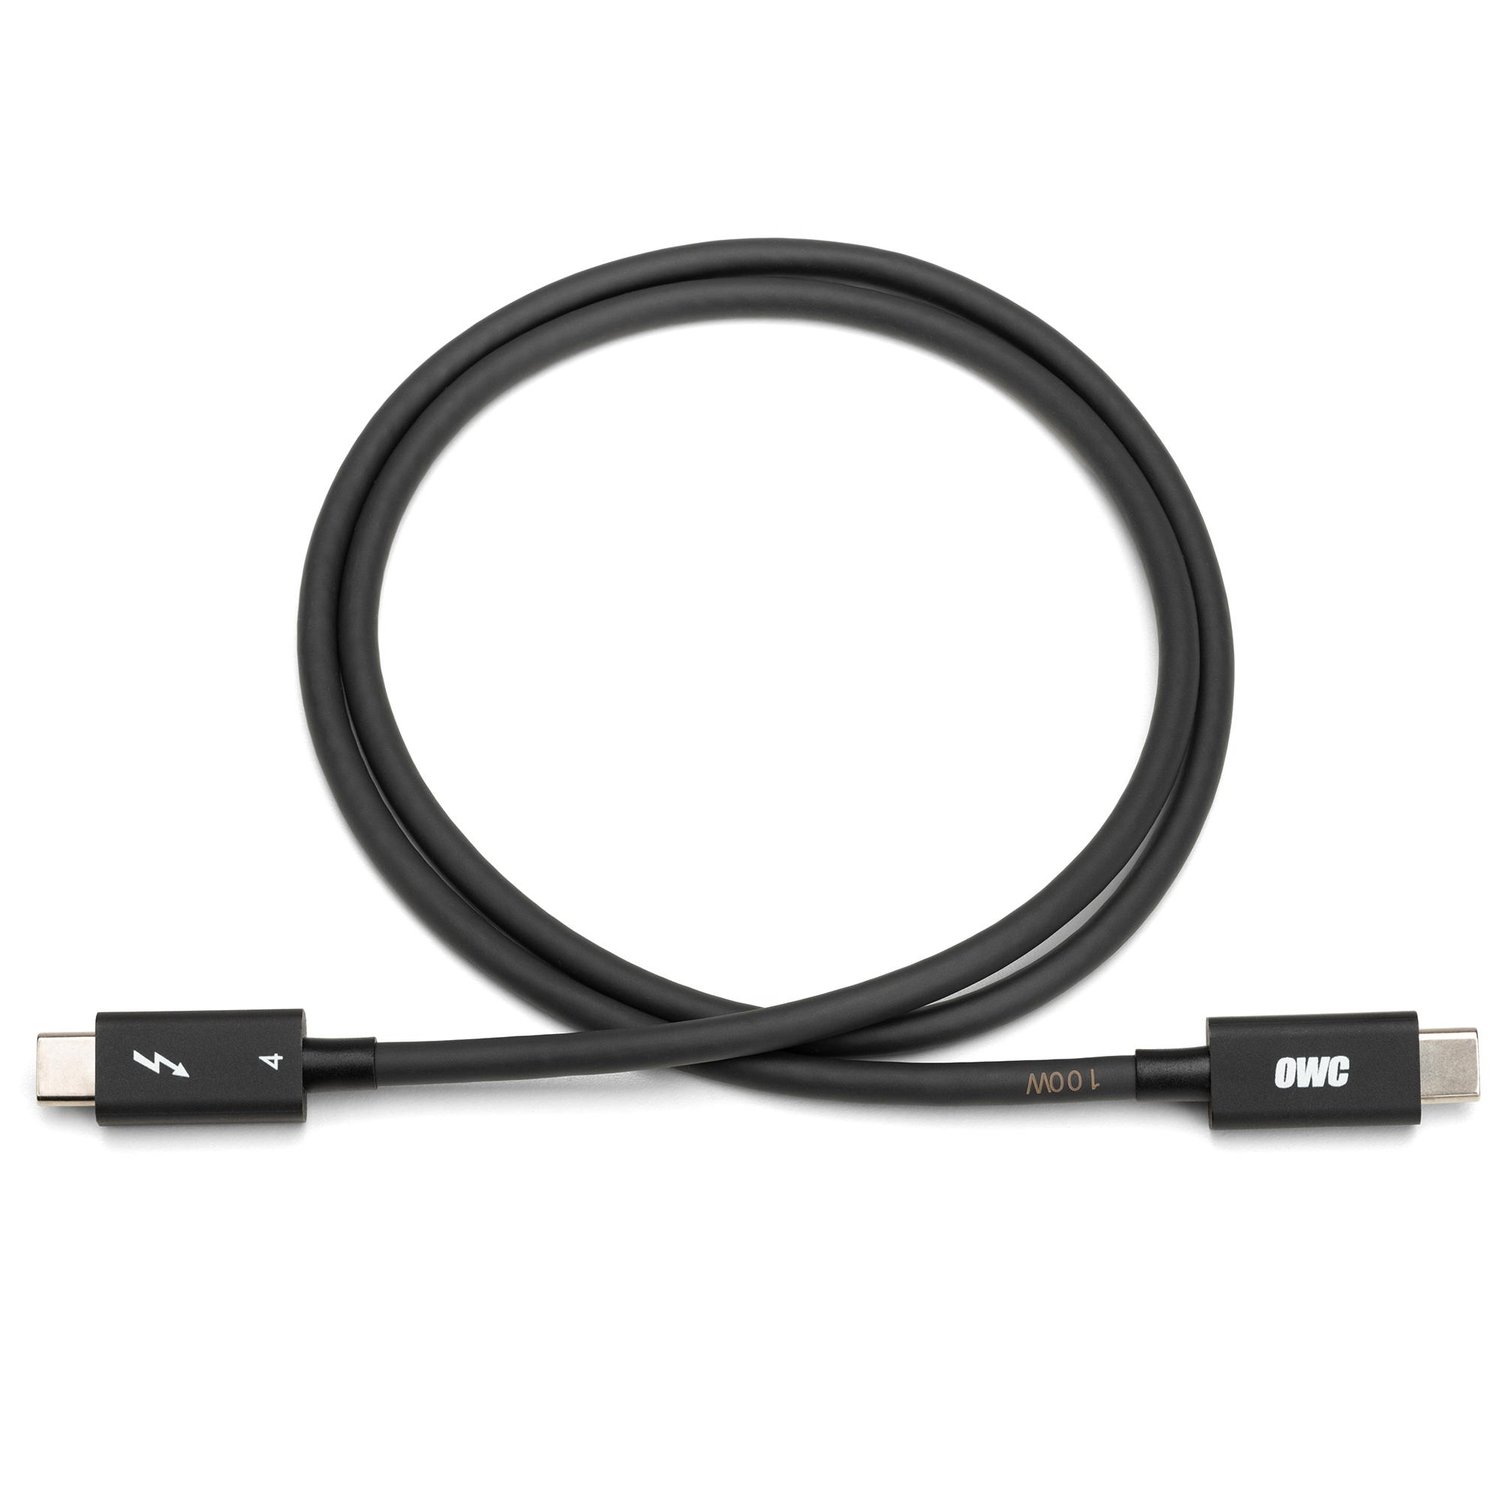 Dwelling antenne Krympe OWC 0.7 Meter (28") Thunderbolt 4/USB-C Cable at MacSales.com